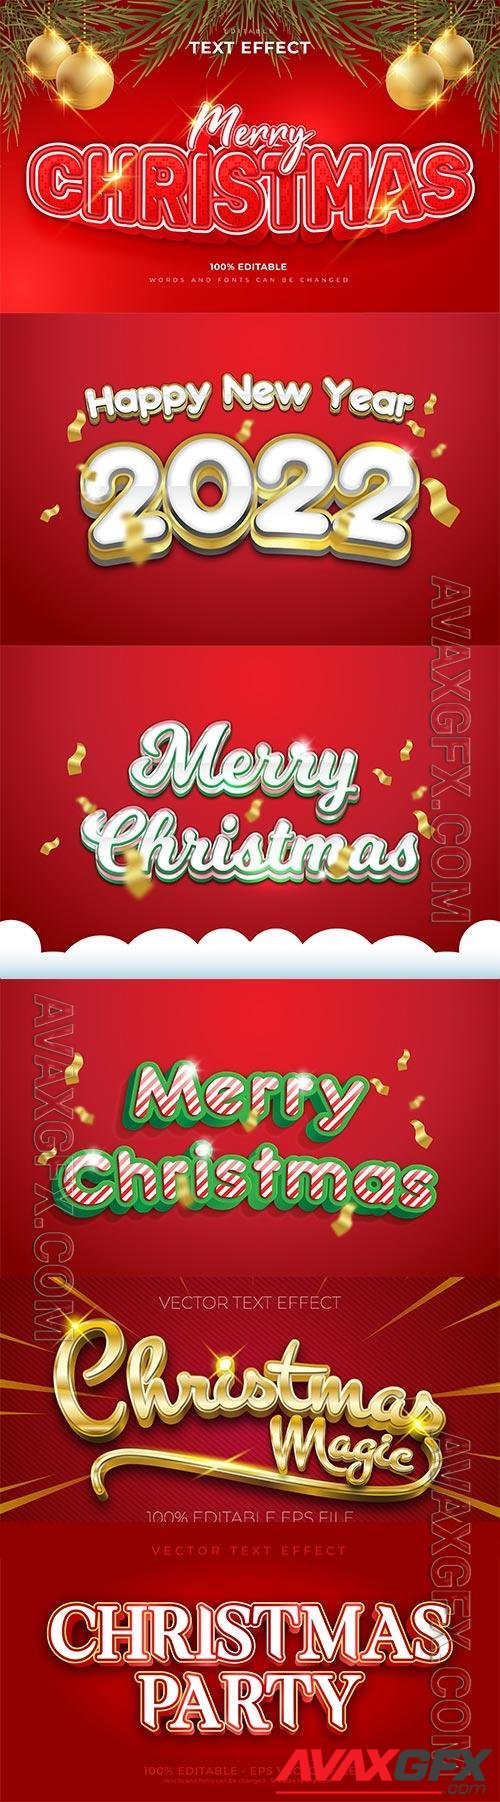 2022 New year and christmas editable text effect vector vol 27